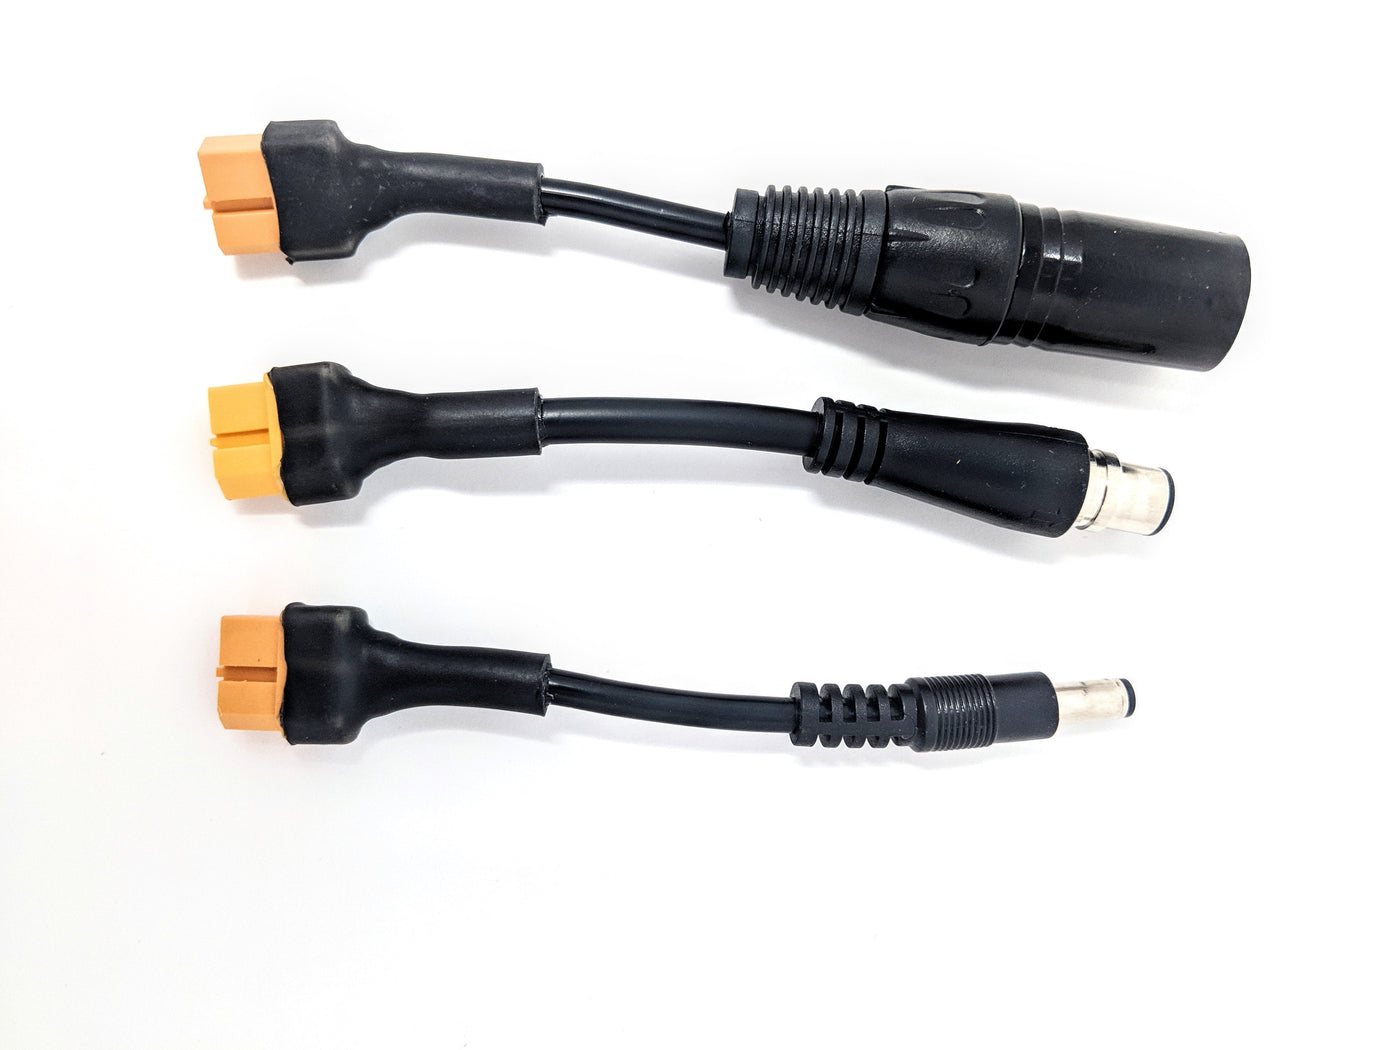 XT60 Charger Adapters